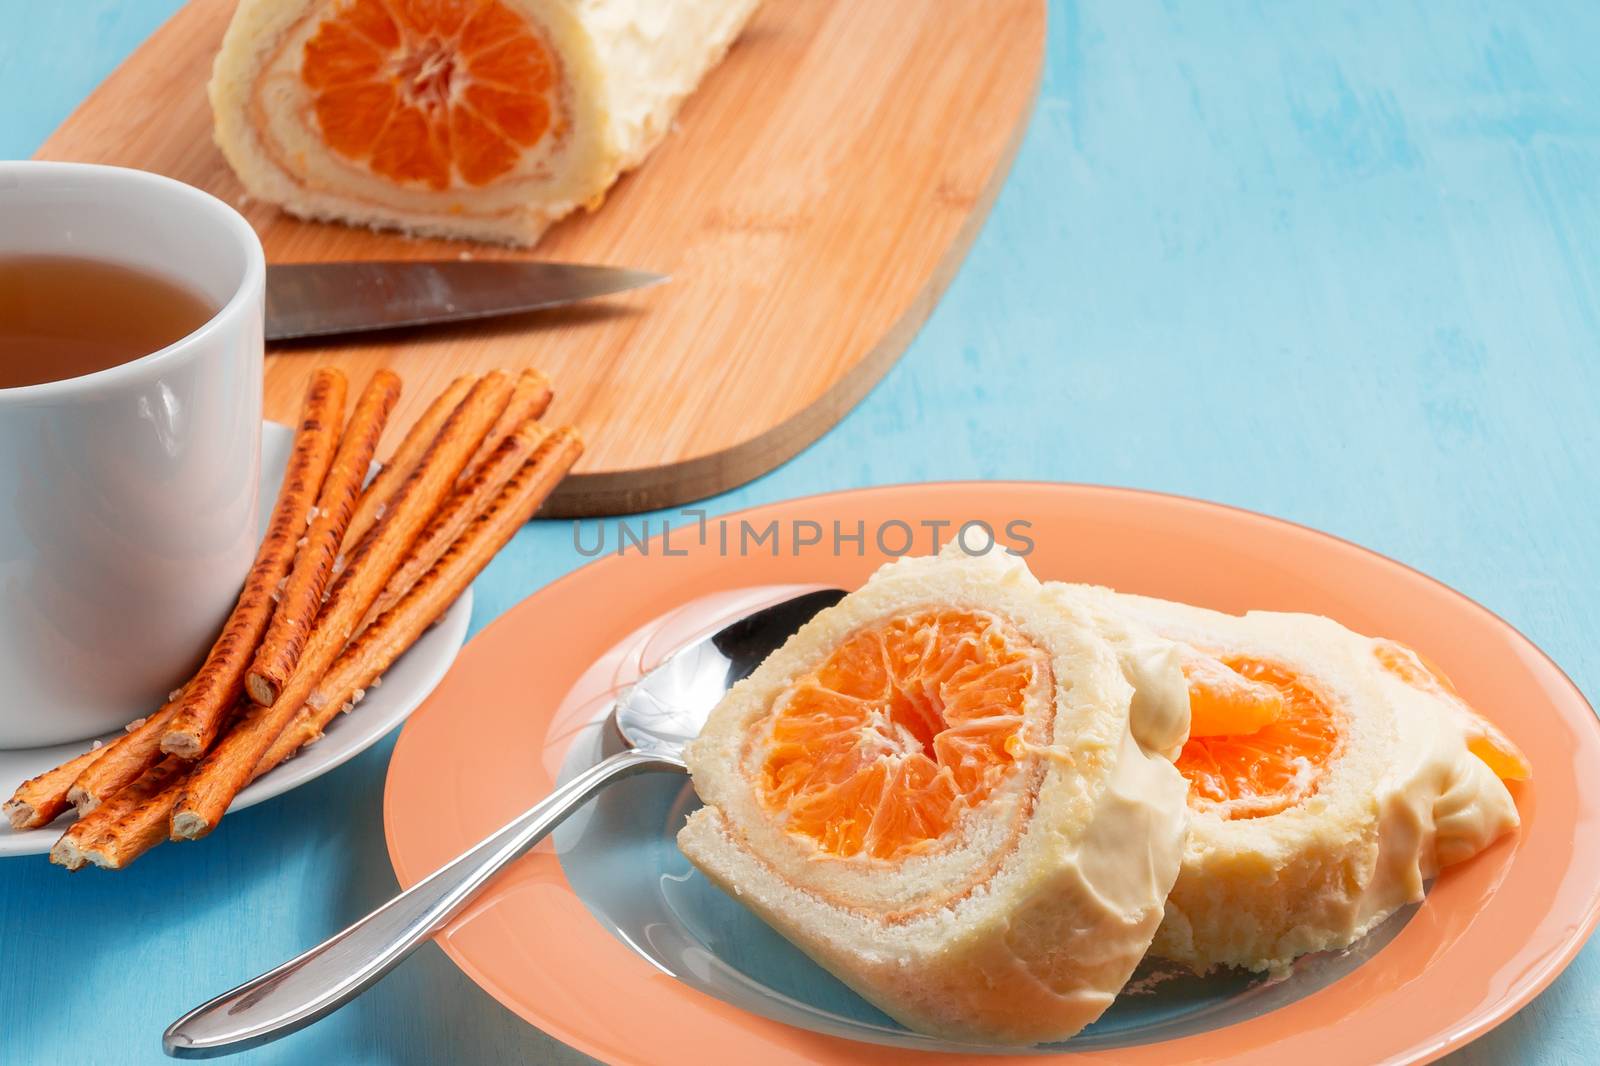 Sweet roll with whipped cream and tangerine filling and a cup of tea by galsand